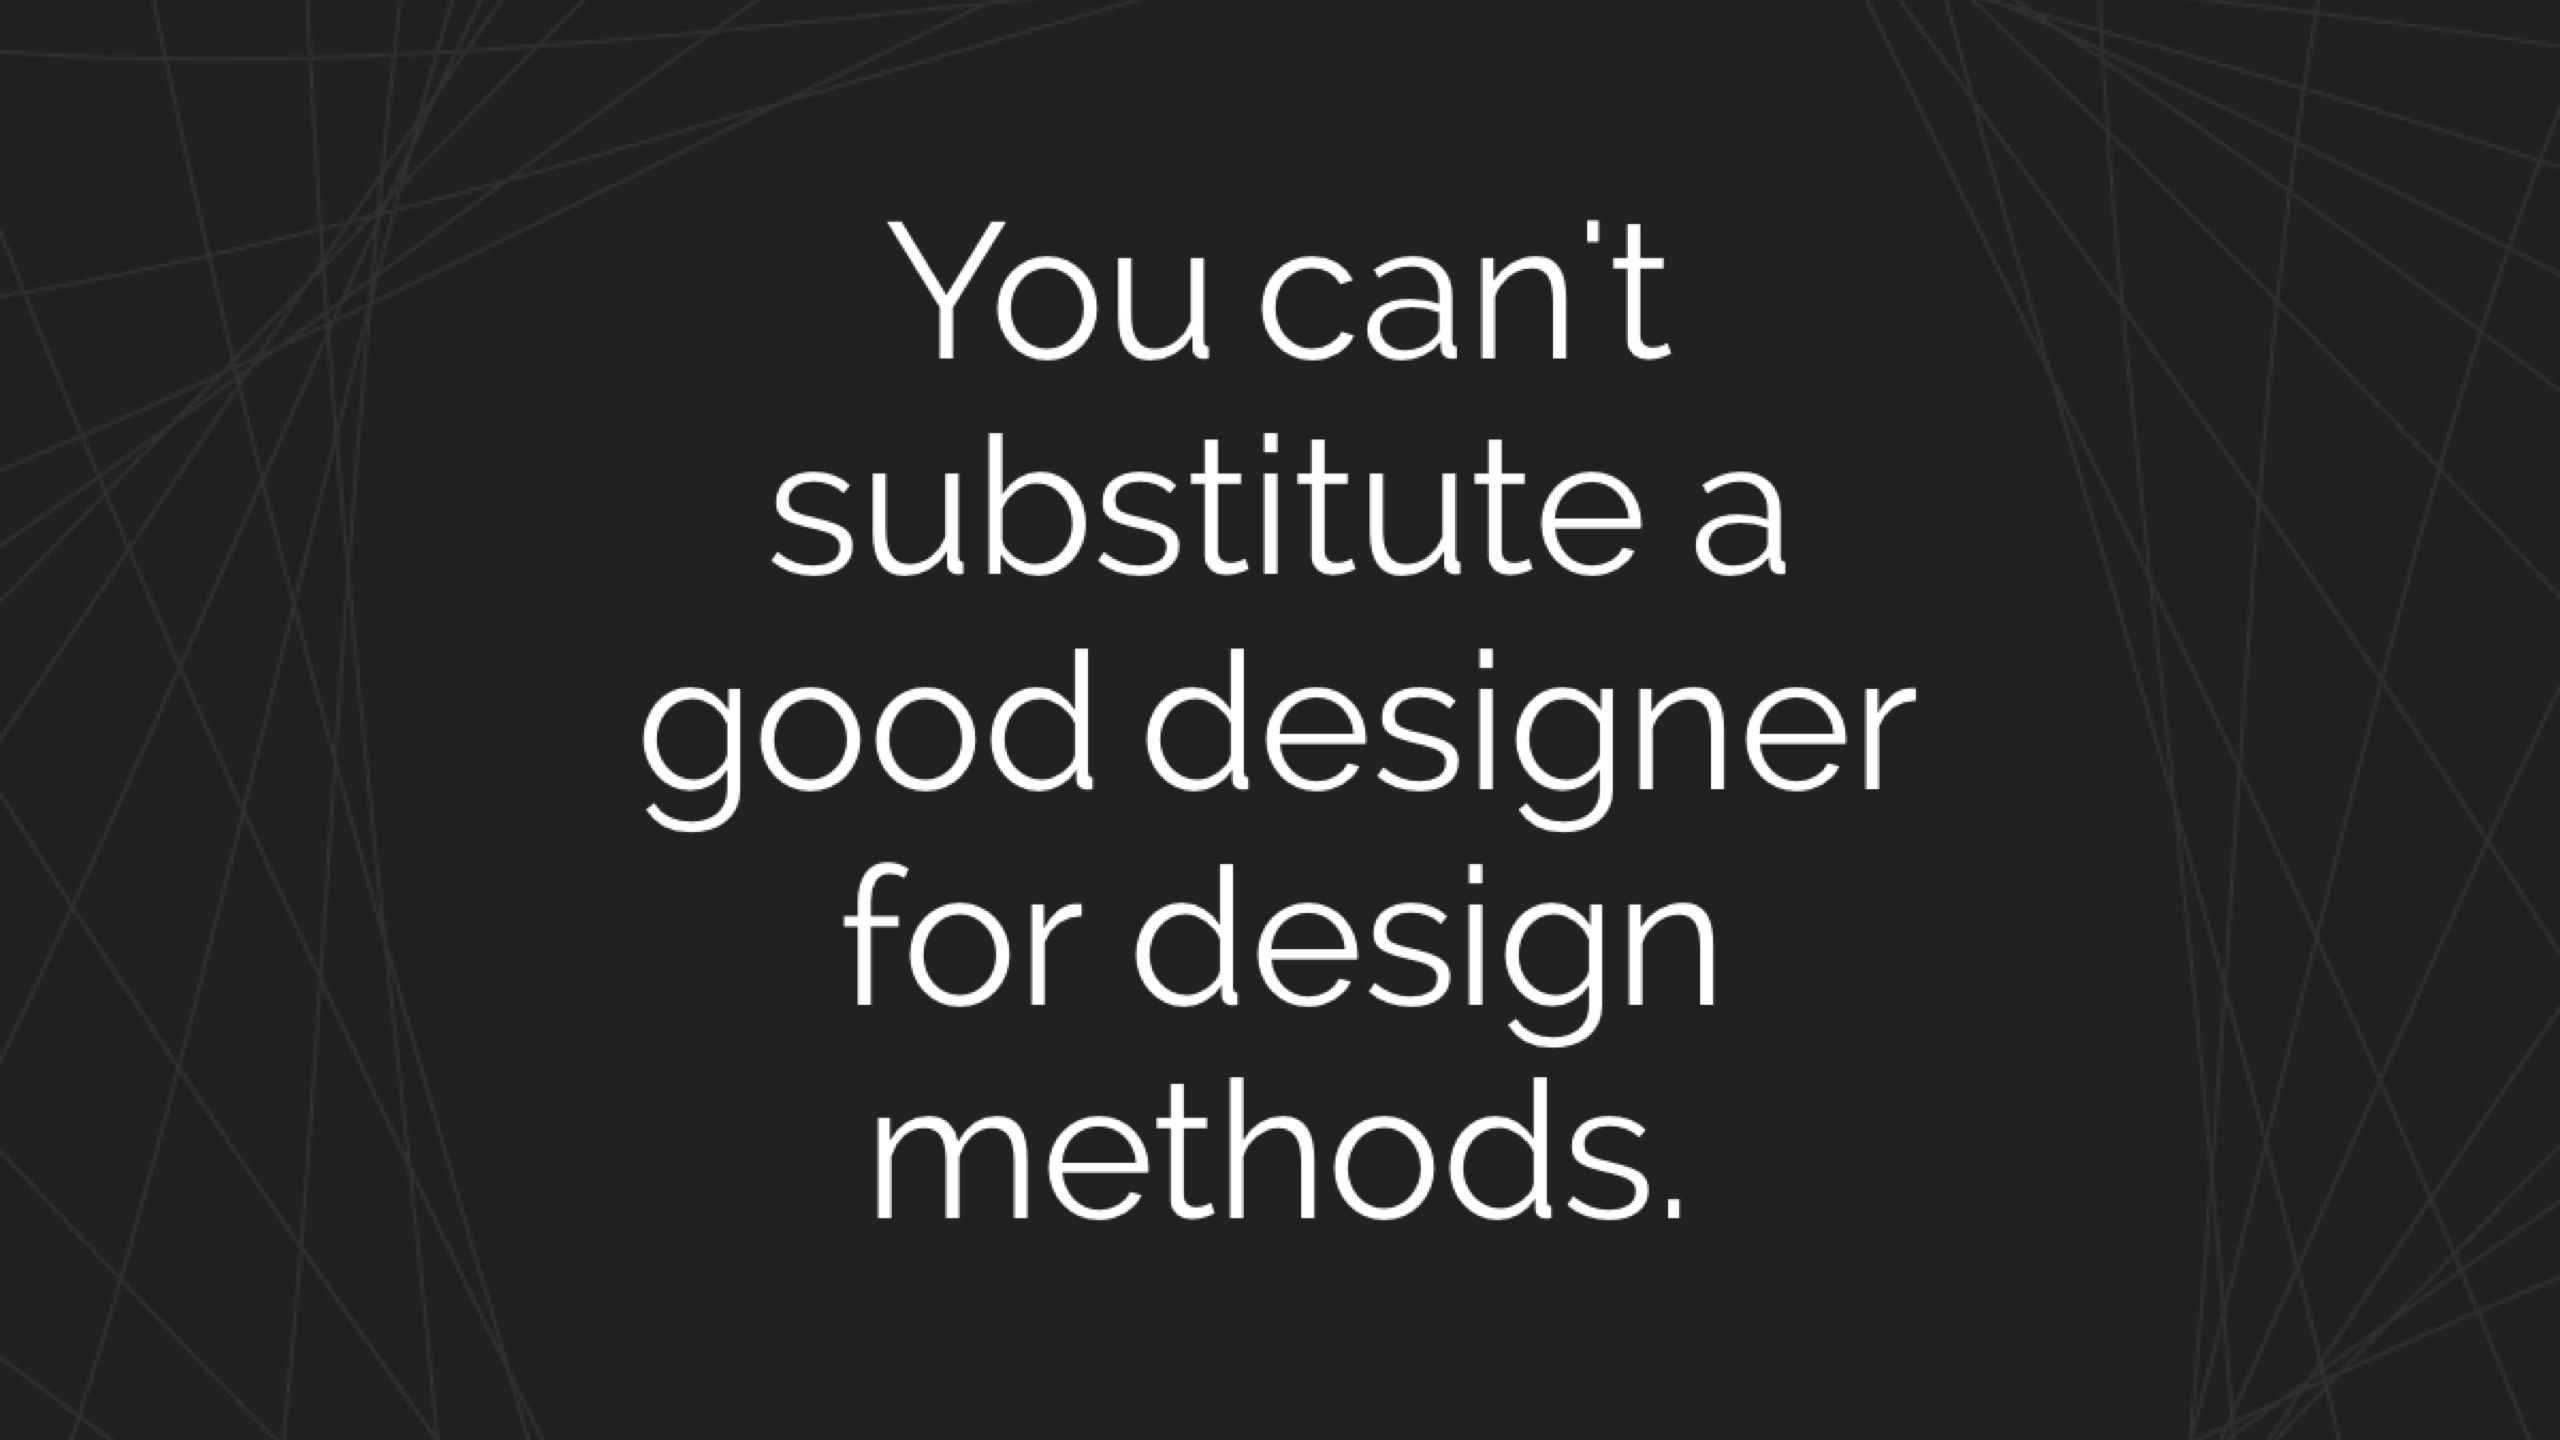 You can't substitute a good designer for design methods.